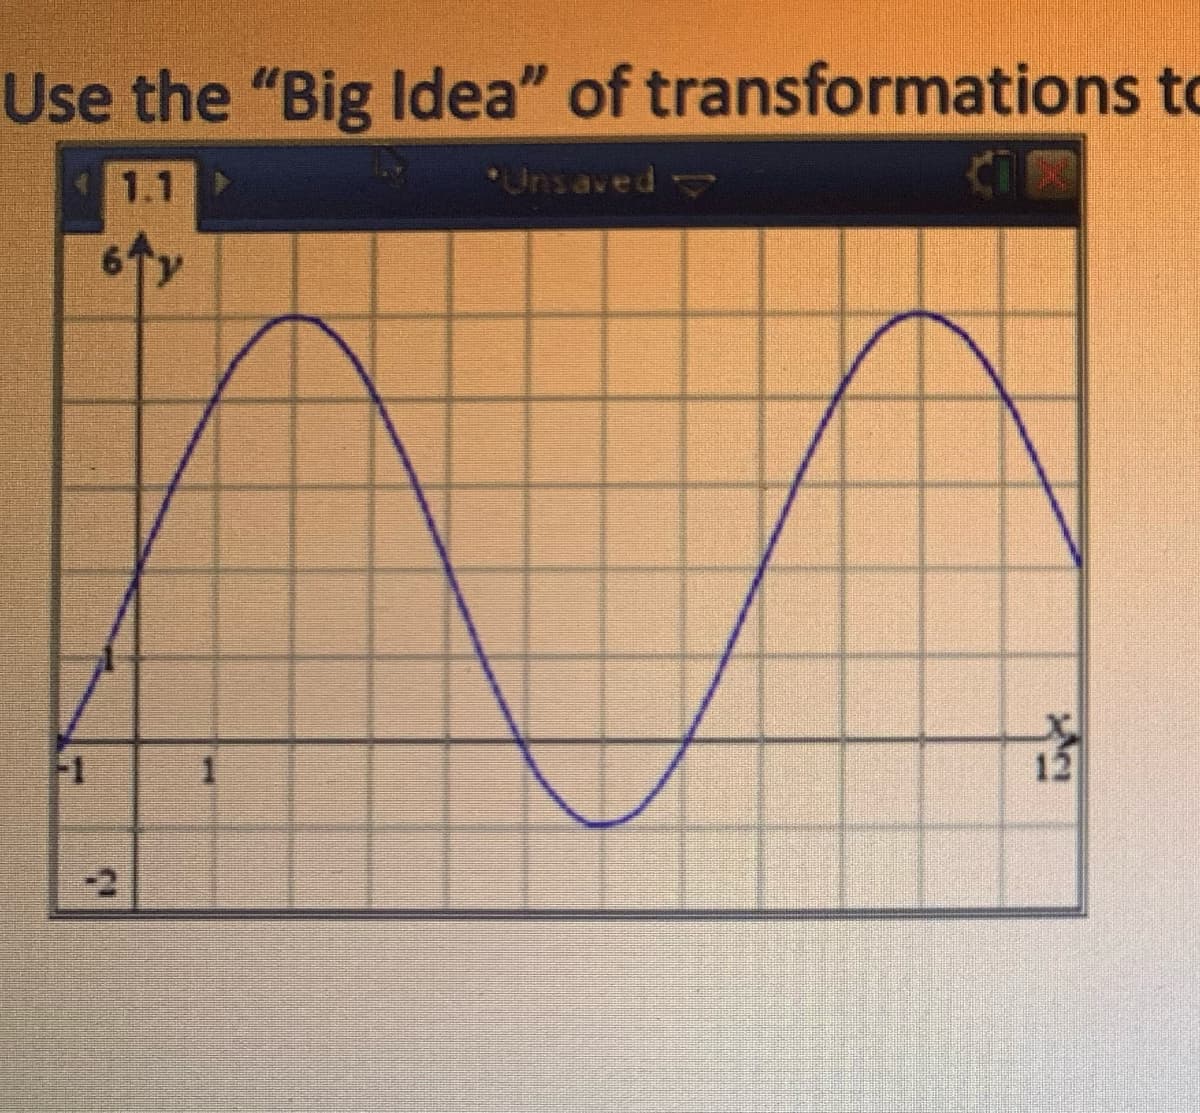 Use the "Big Idea" of transformations to
1.1
*Unsaved
F1
12
-2
